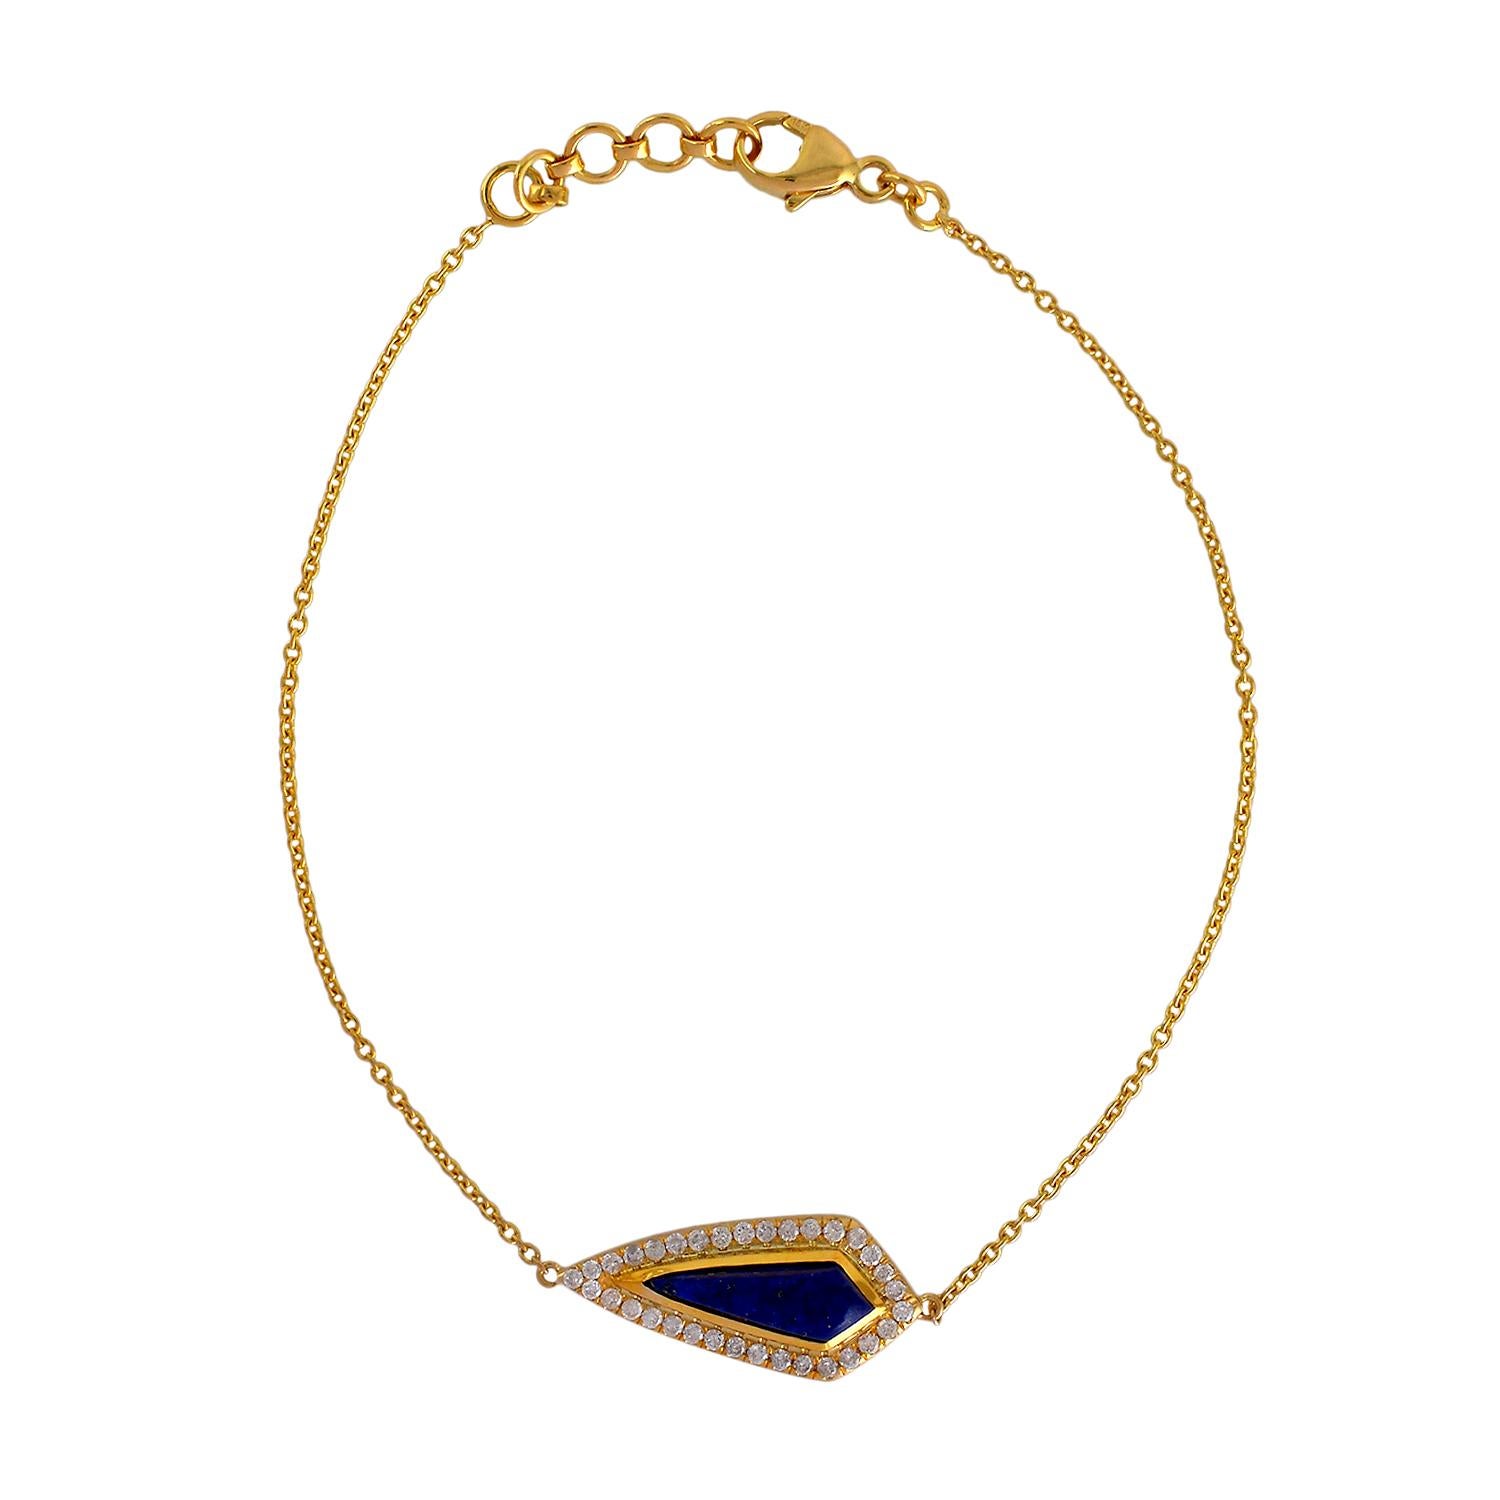 Pear Shaped Lapis Bracelet With Pave Diamonds Made In 18k yellow Gold In New Condition For Sale In New York, NY